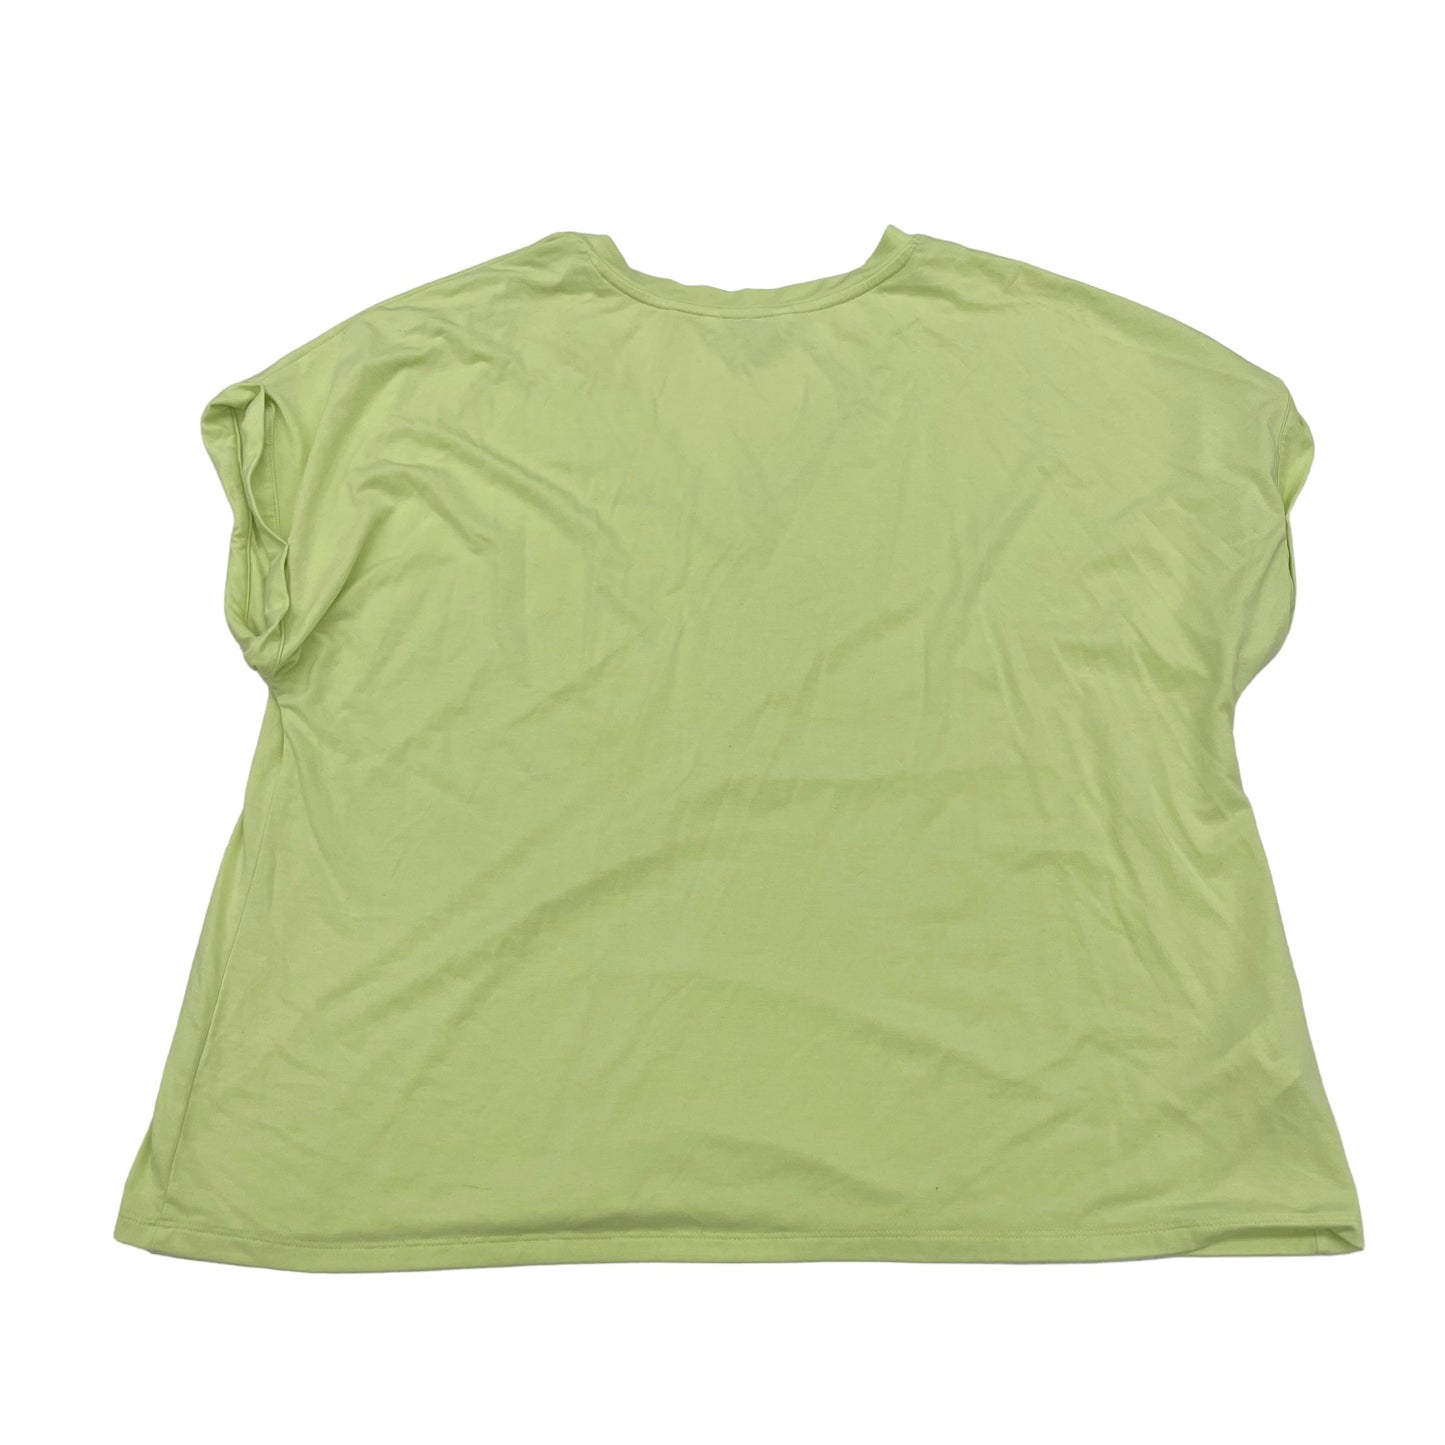 GREEN TOMMY BAHAMA TOP SS BASIC, Size XL